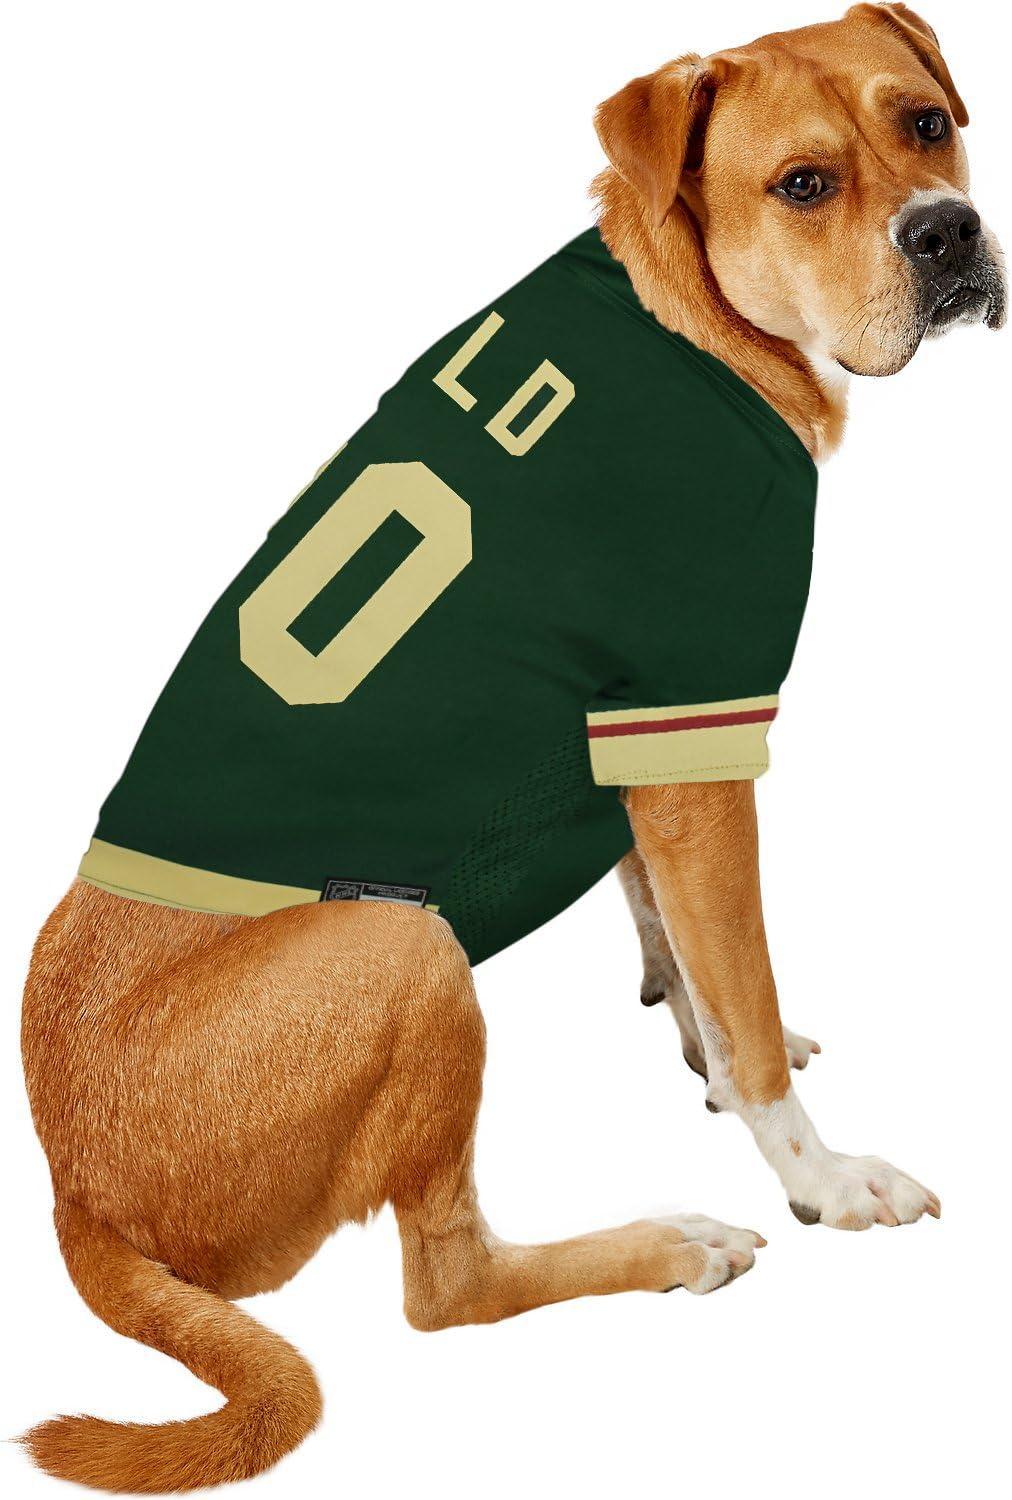 Pets First NHL Minnesota Wild Tee Shirt for Dogs & Cats, Medium. - are You  A Hockey Fan? Let Your Pet Be an NHL Fan Too!